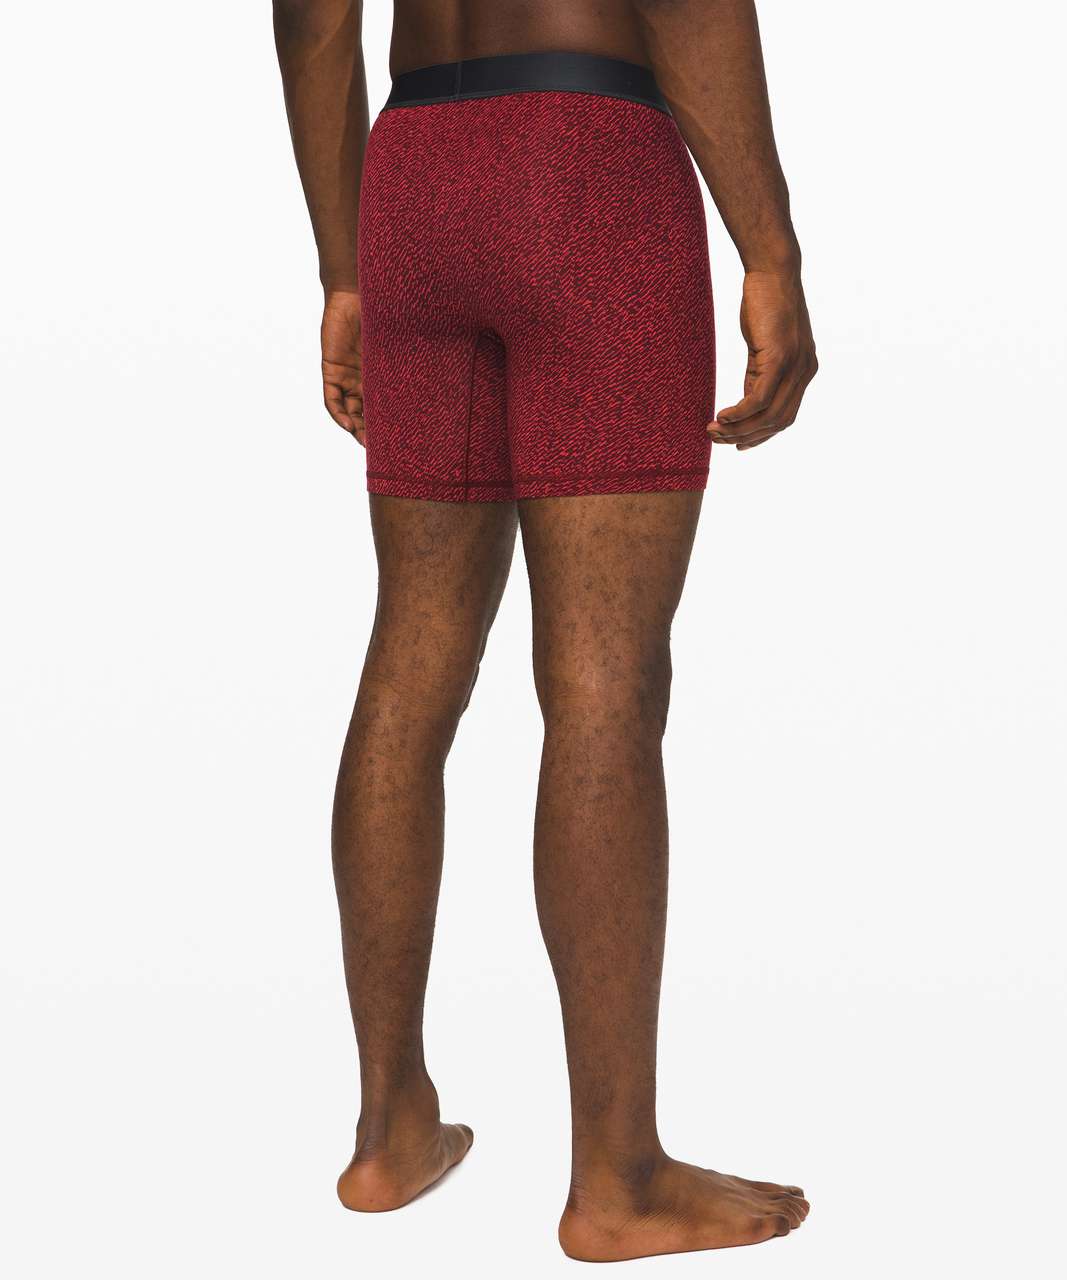 Lululemon Always In Motion Boxer *The Long One 7" - Staccato Persian Red Deep Rouge